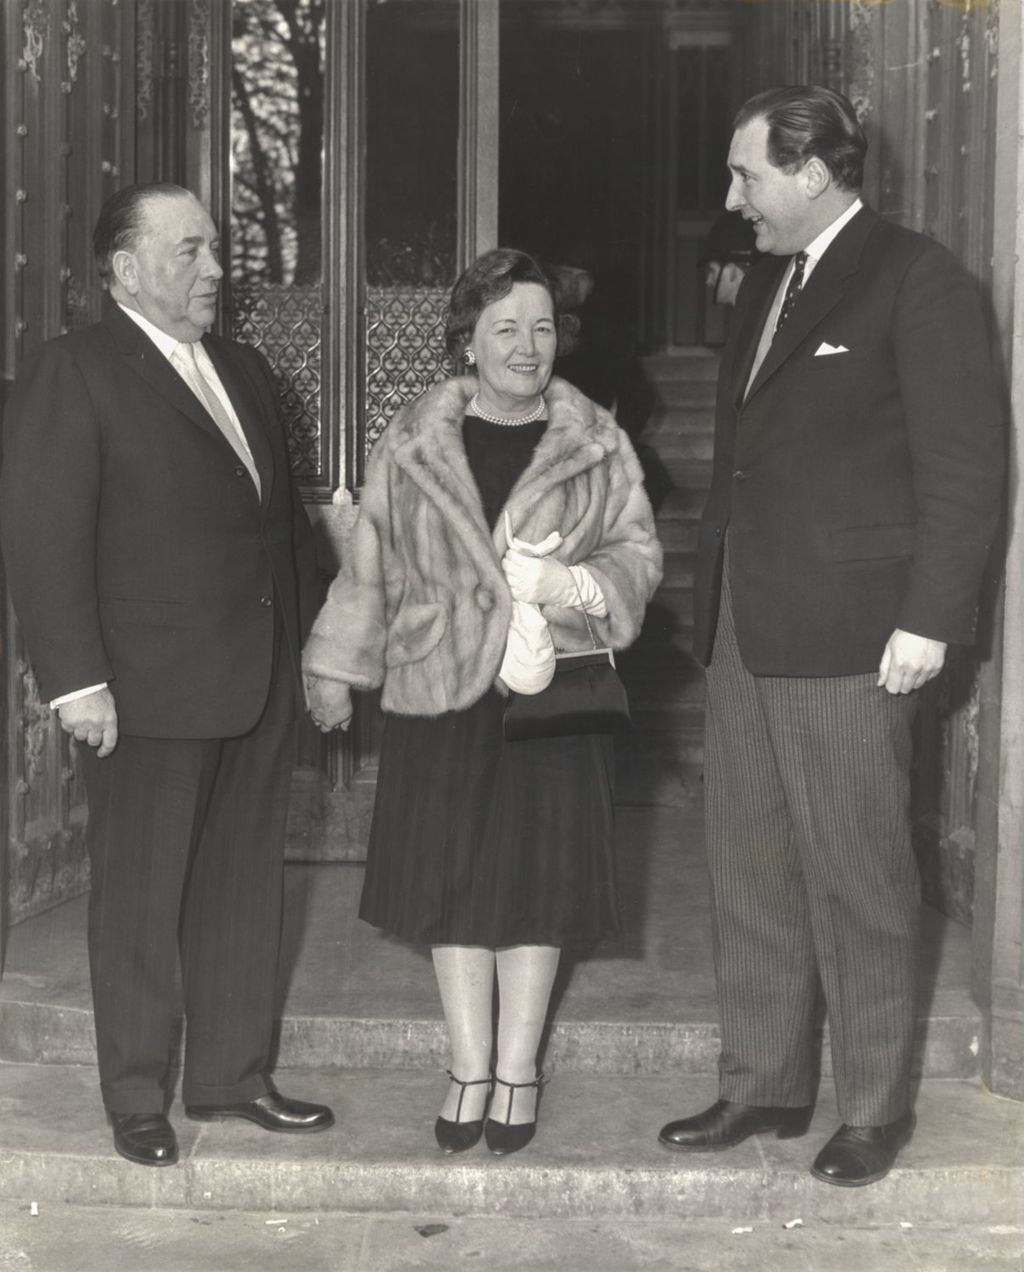 Miniature of Richard J. and Eleanor Daley with a member of Parliament at the House of Commons in London